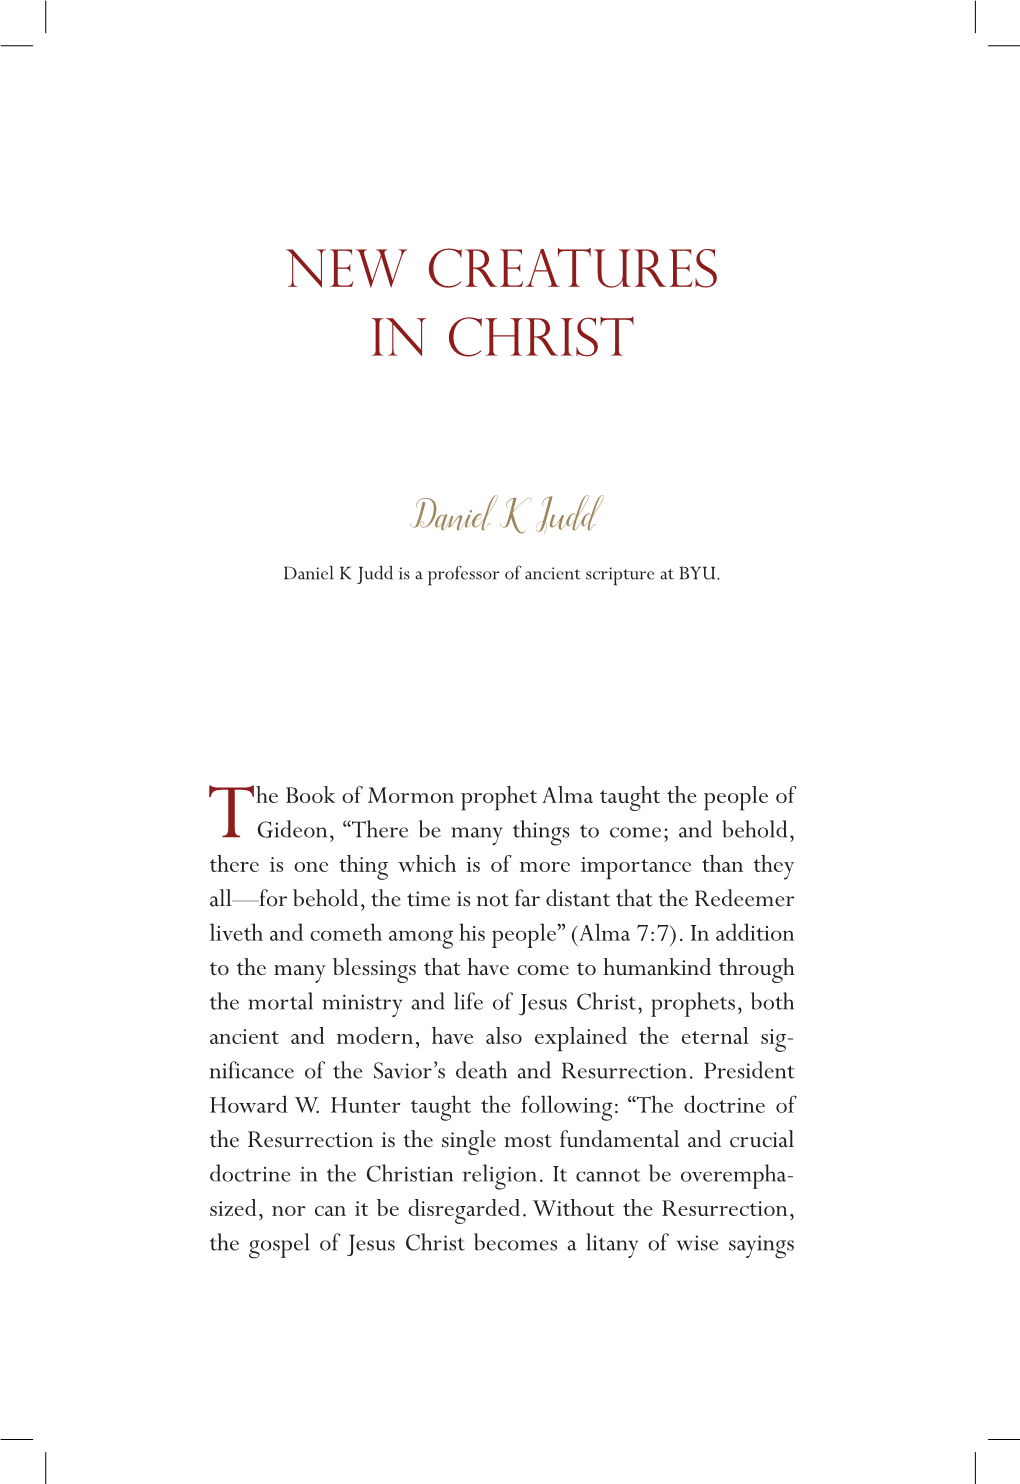 New Creatures in Christ